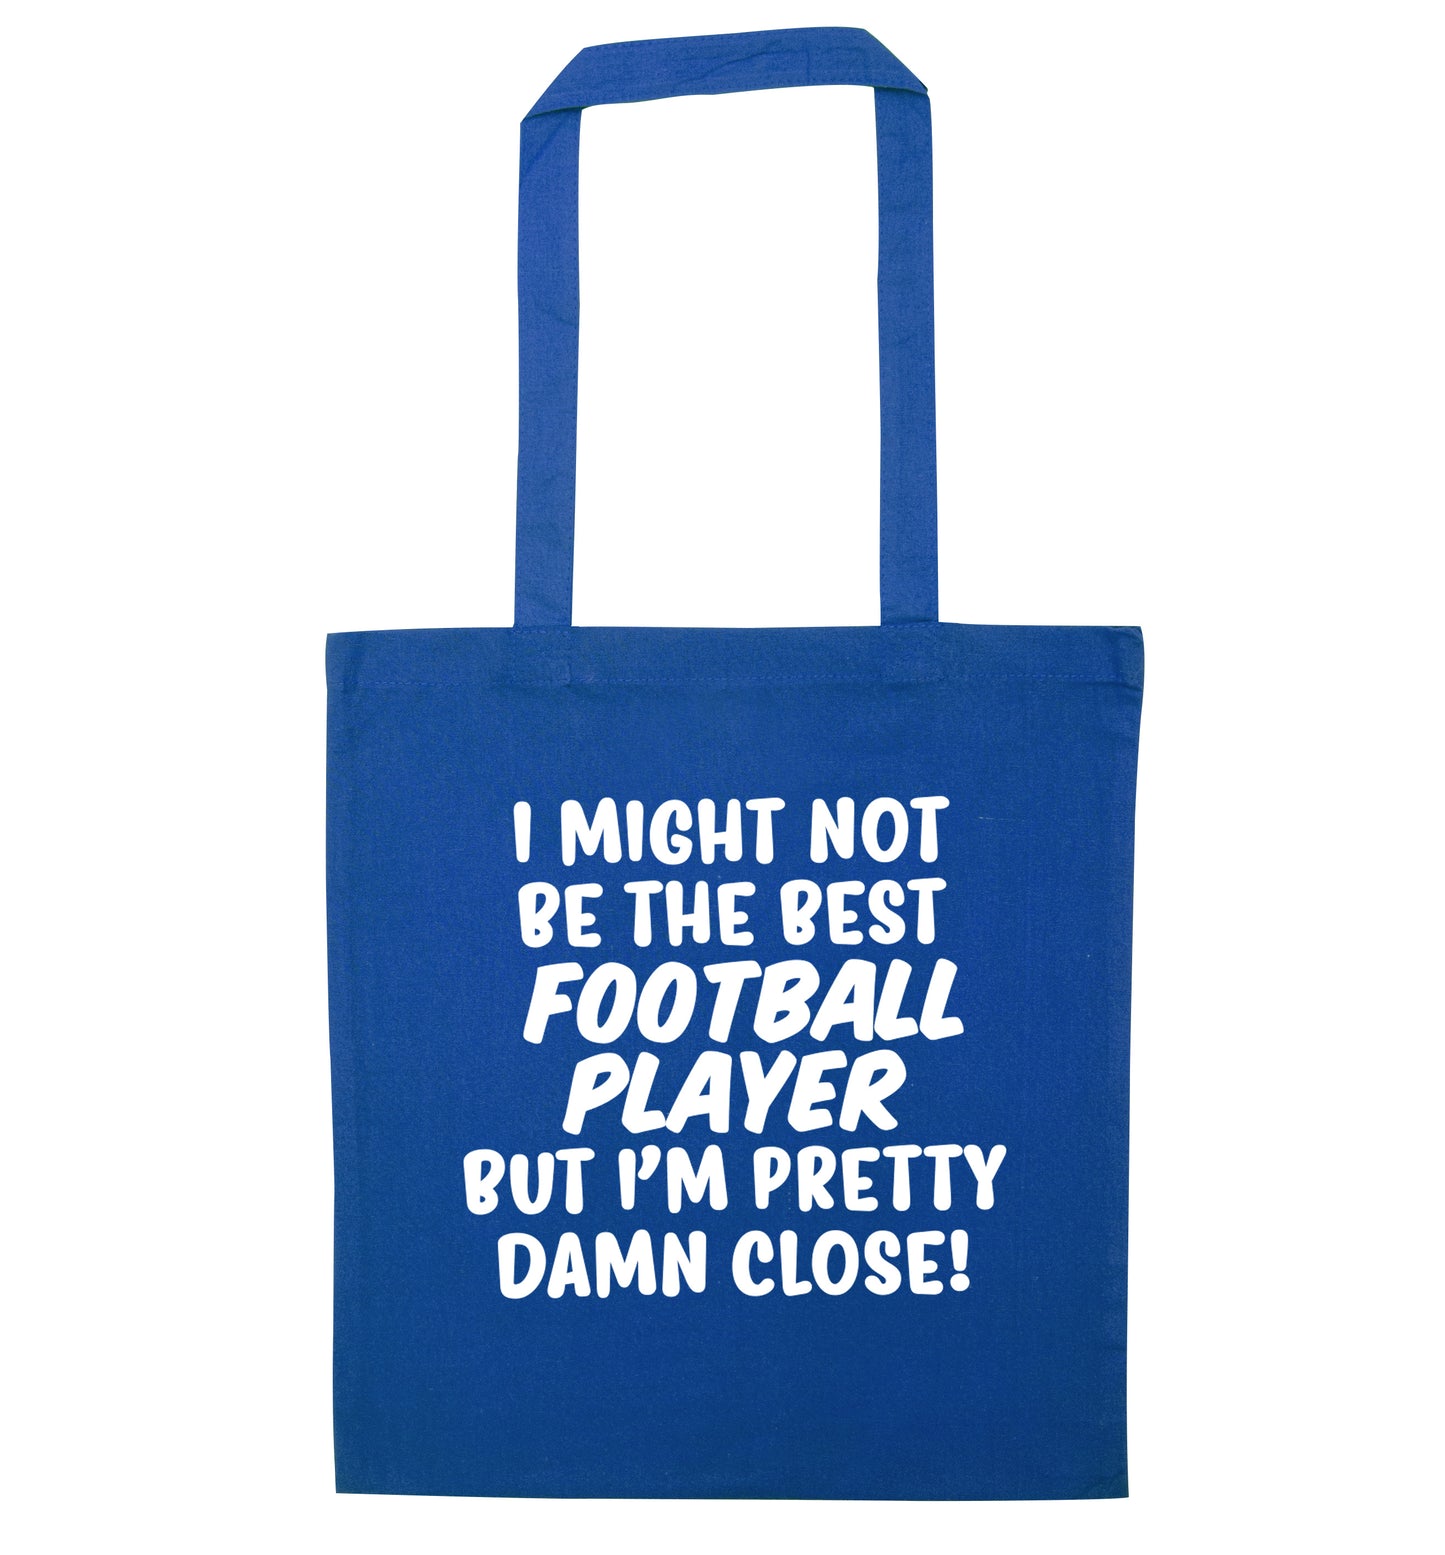 I might not be the best football player but I'm pretty close! blue tote bag